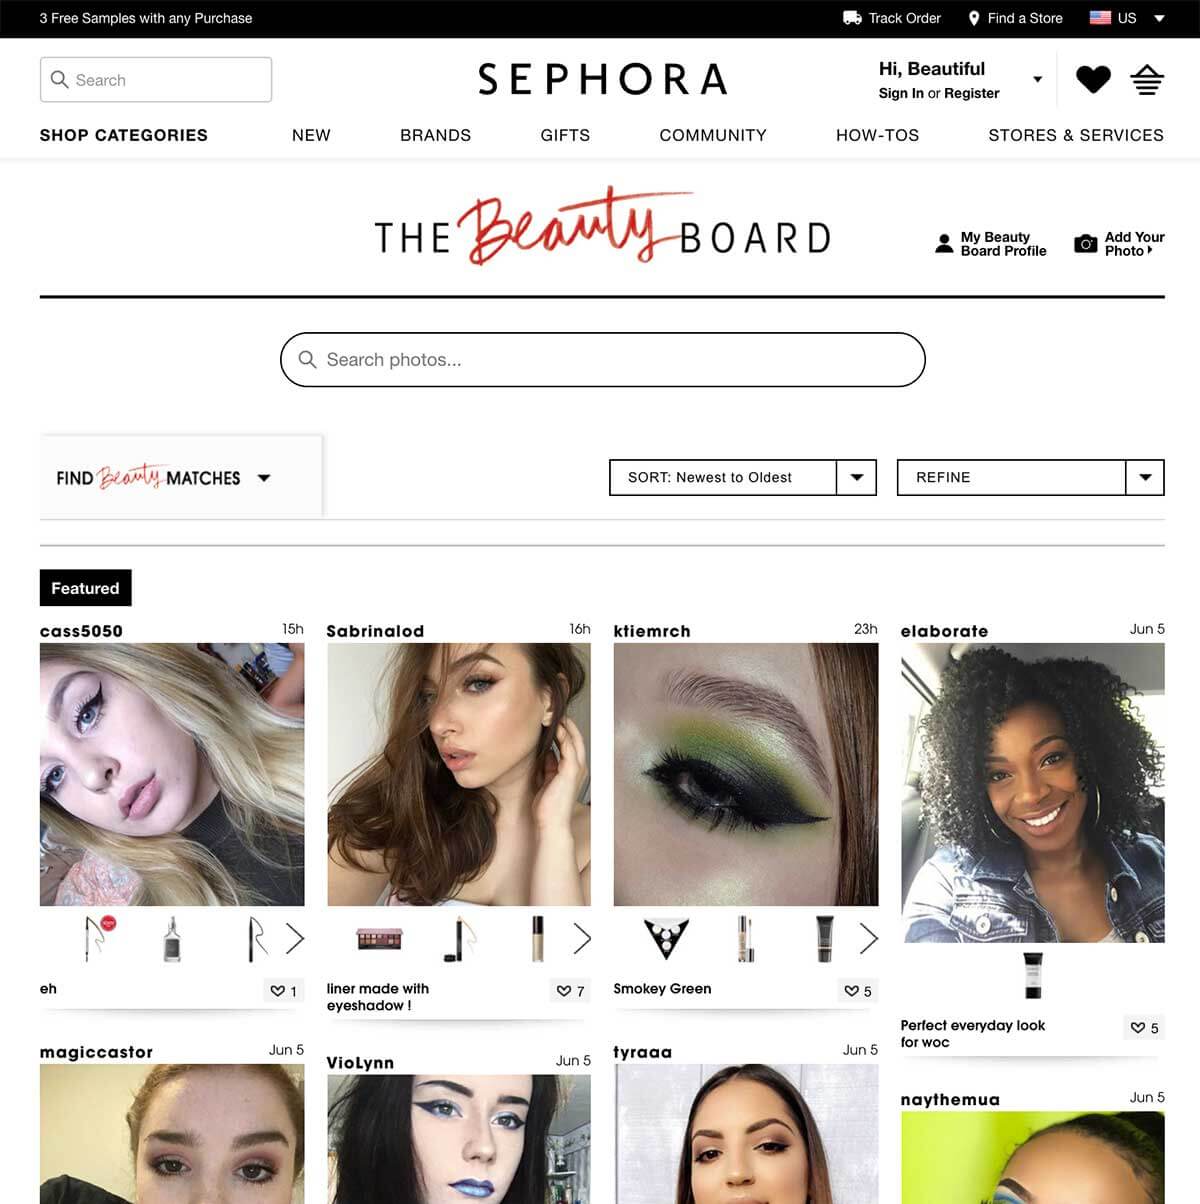 Sephora beauty board user-generated content